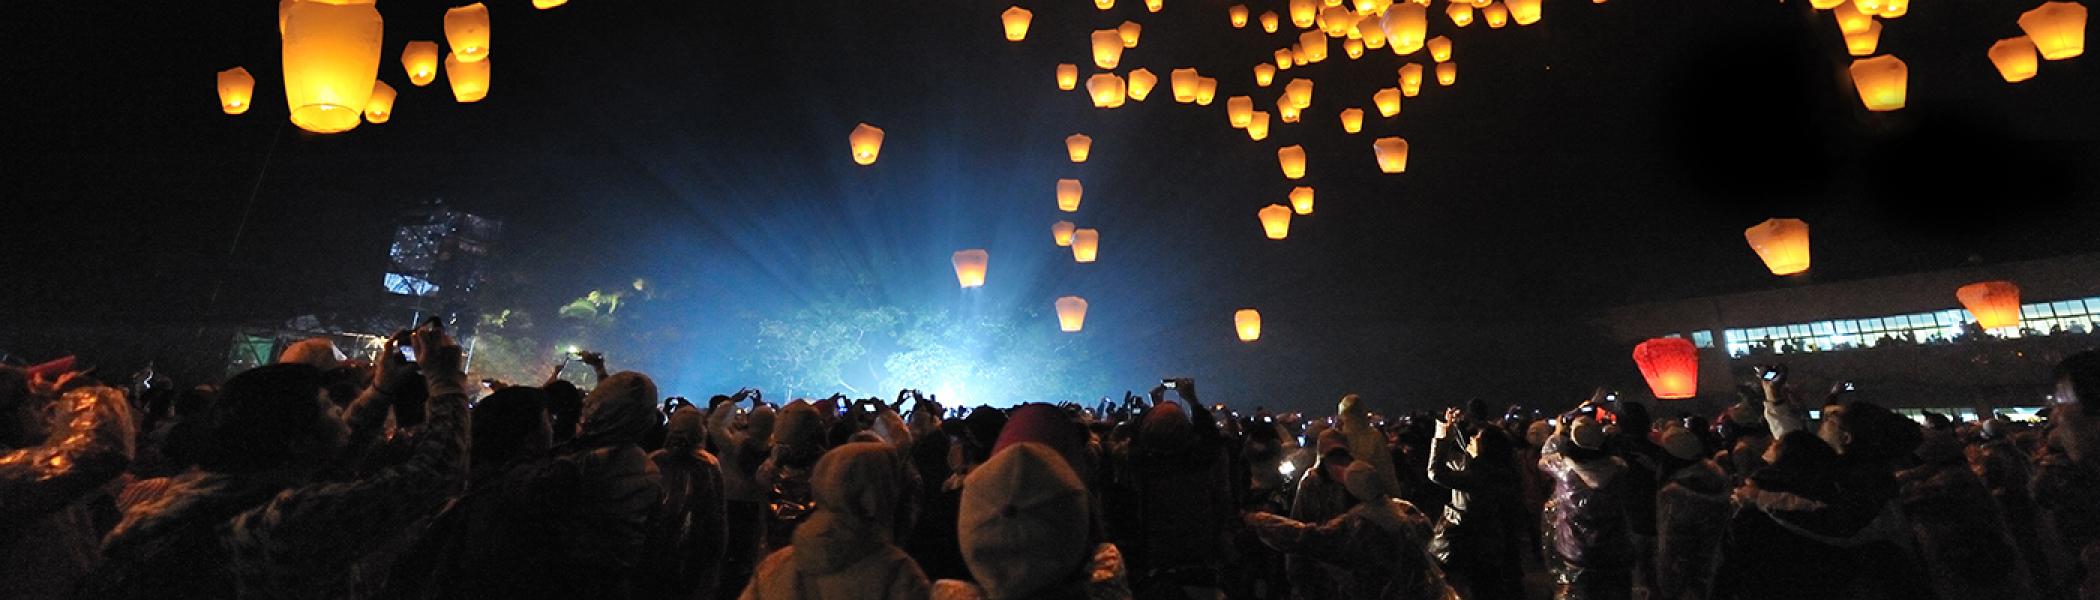 A crowd of people staring up a candles floating in the sky at night